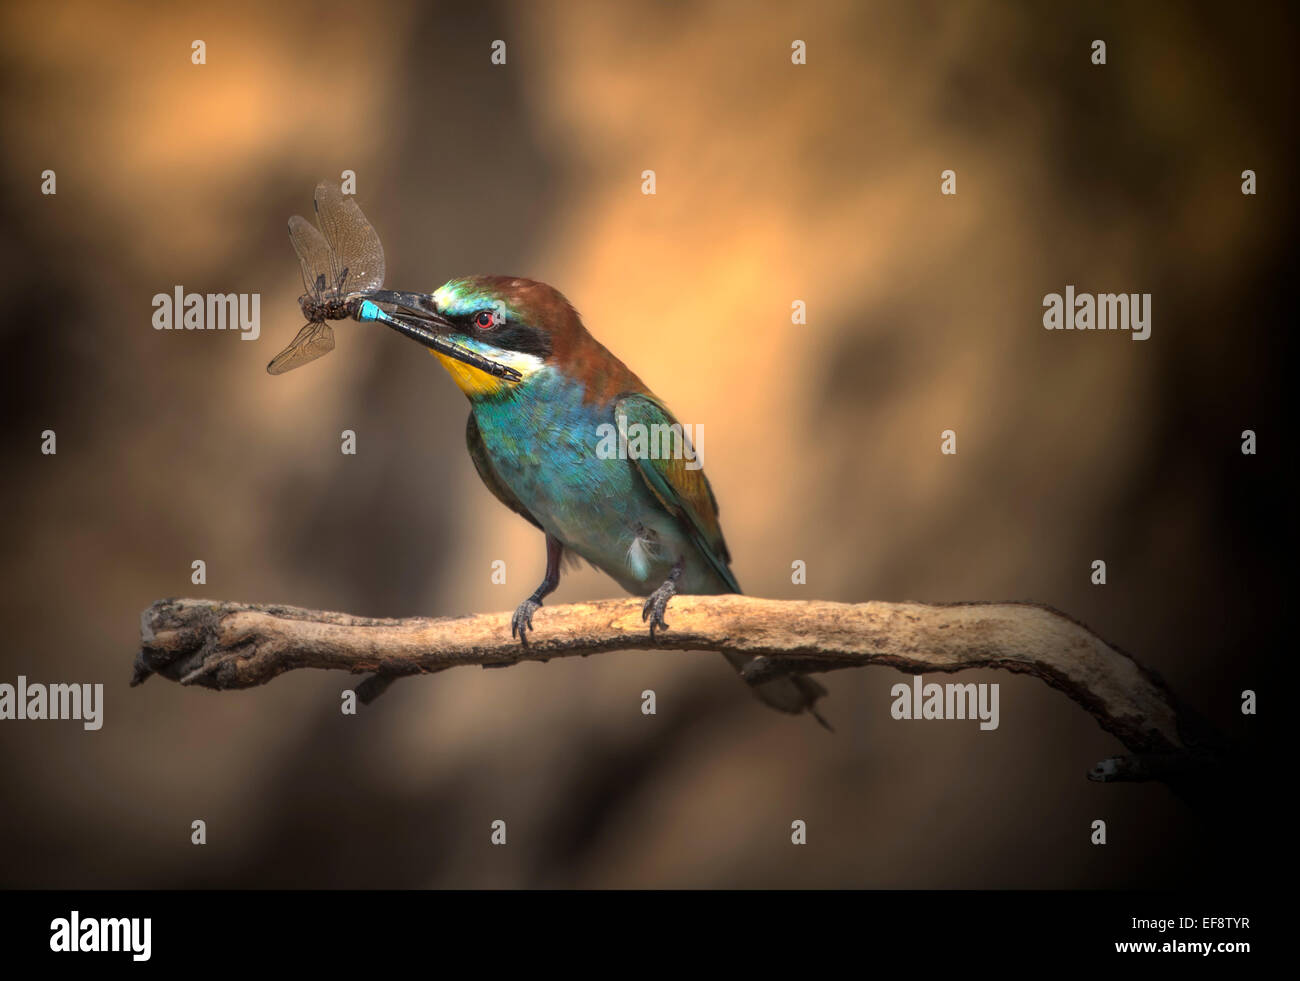 Spain, Navarra, Comunidad Foral de Navarra, Bee-eater perching on branch and holding insect Stock Photo